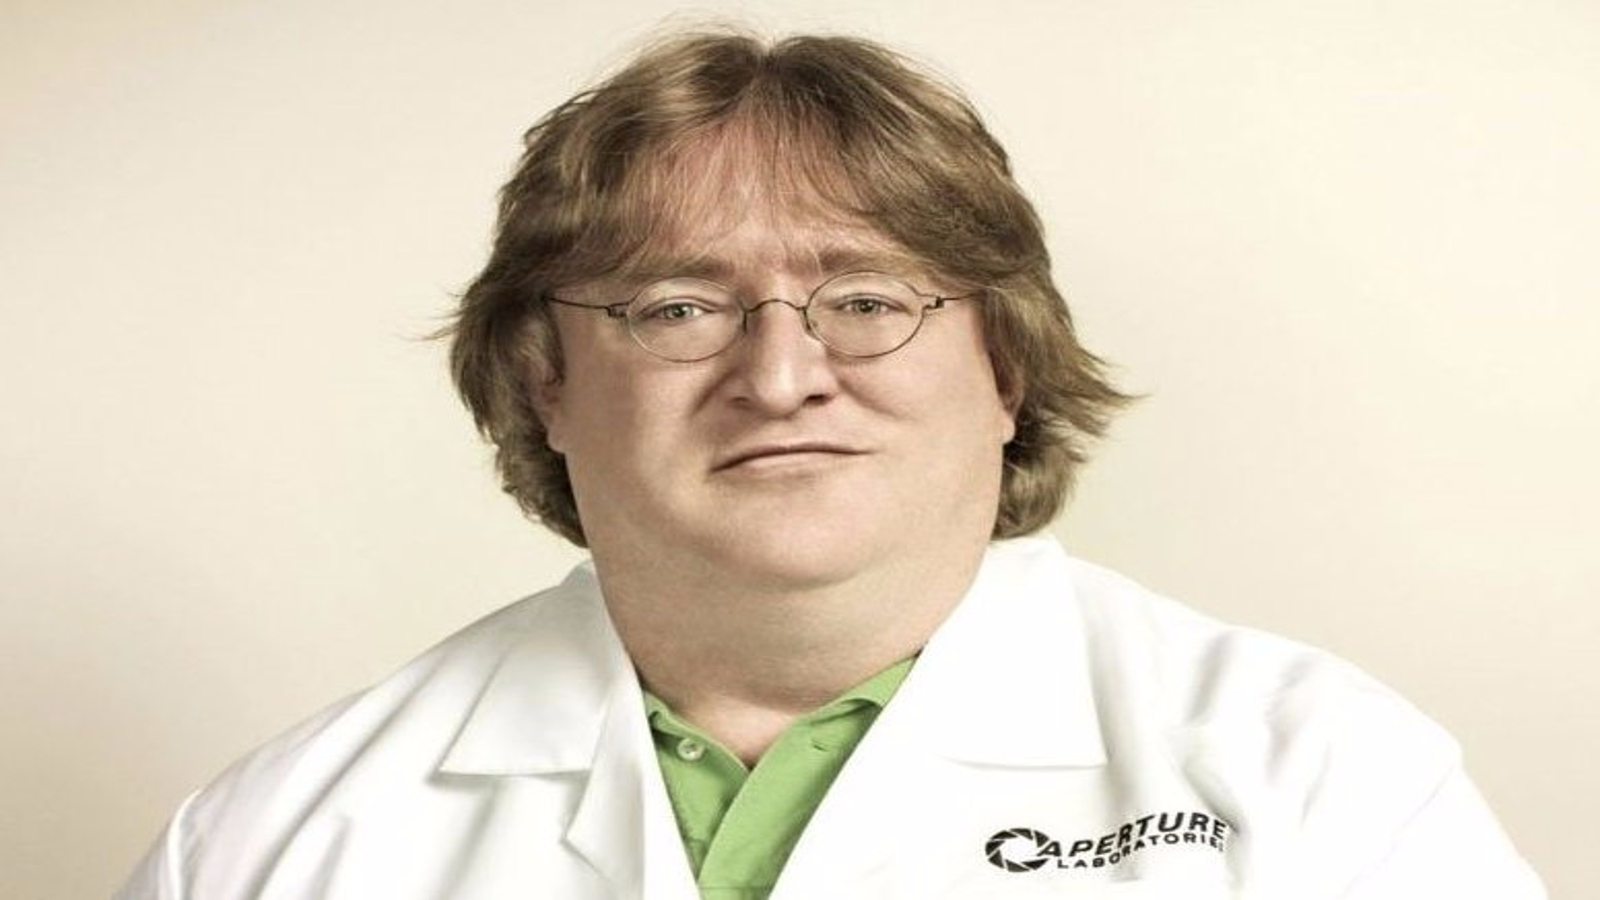 Gabe Newell's Problem Isn't With NFTs Or Metaverse, But The 'Bad Actors'  Behind Them